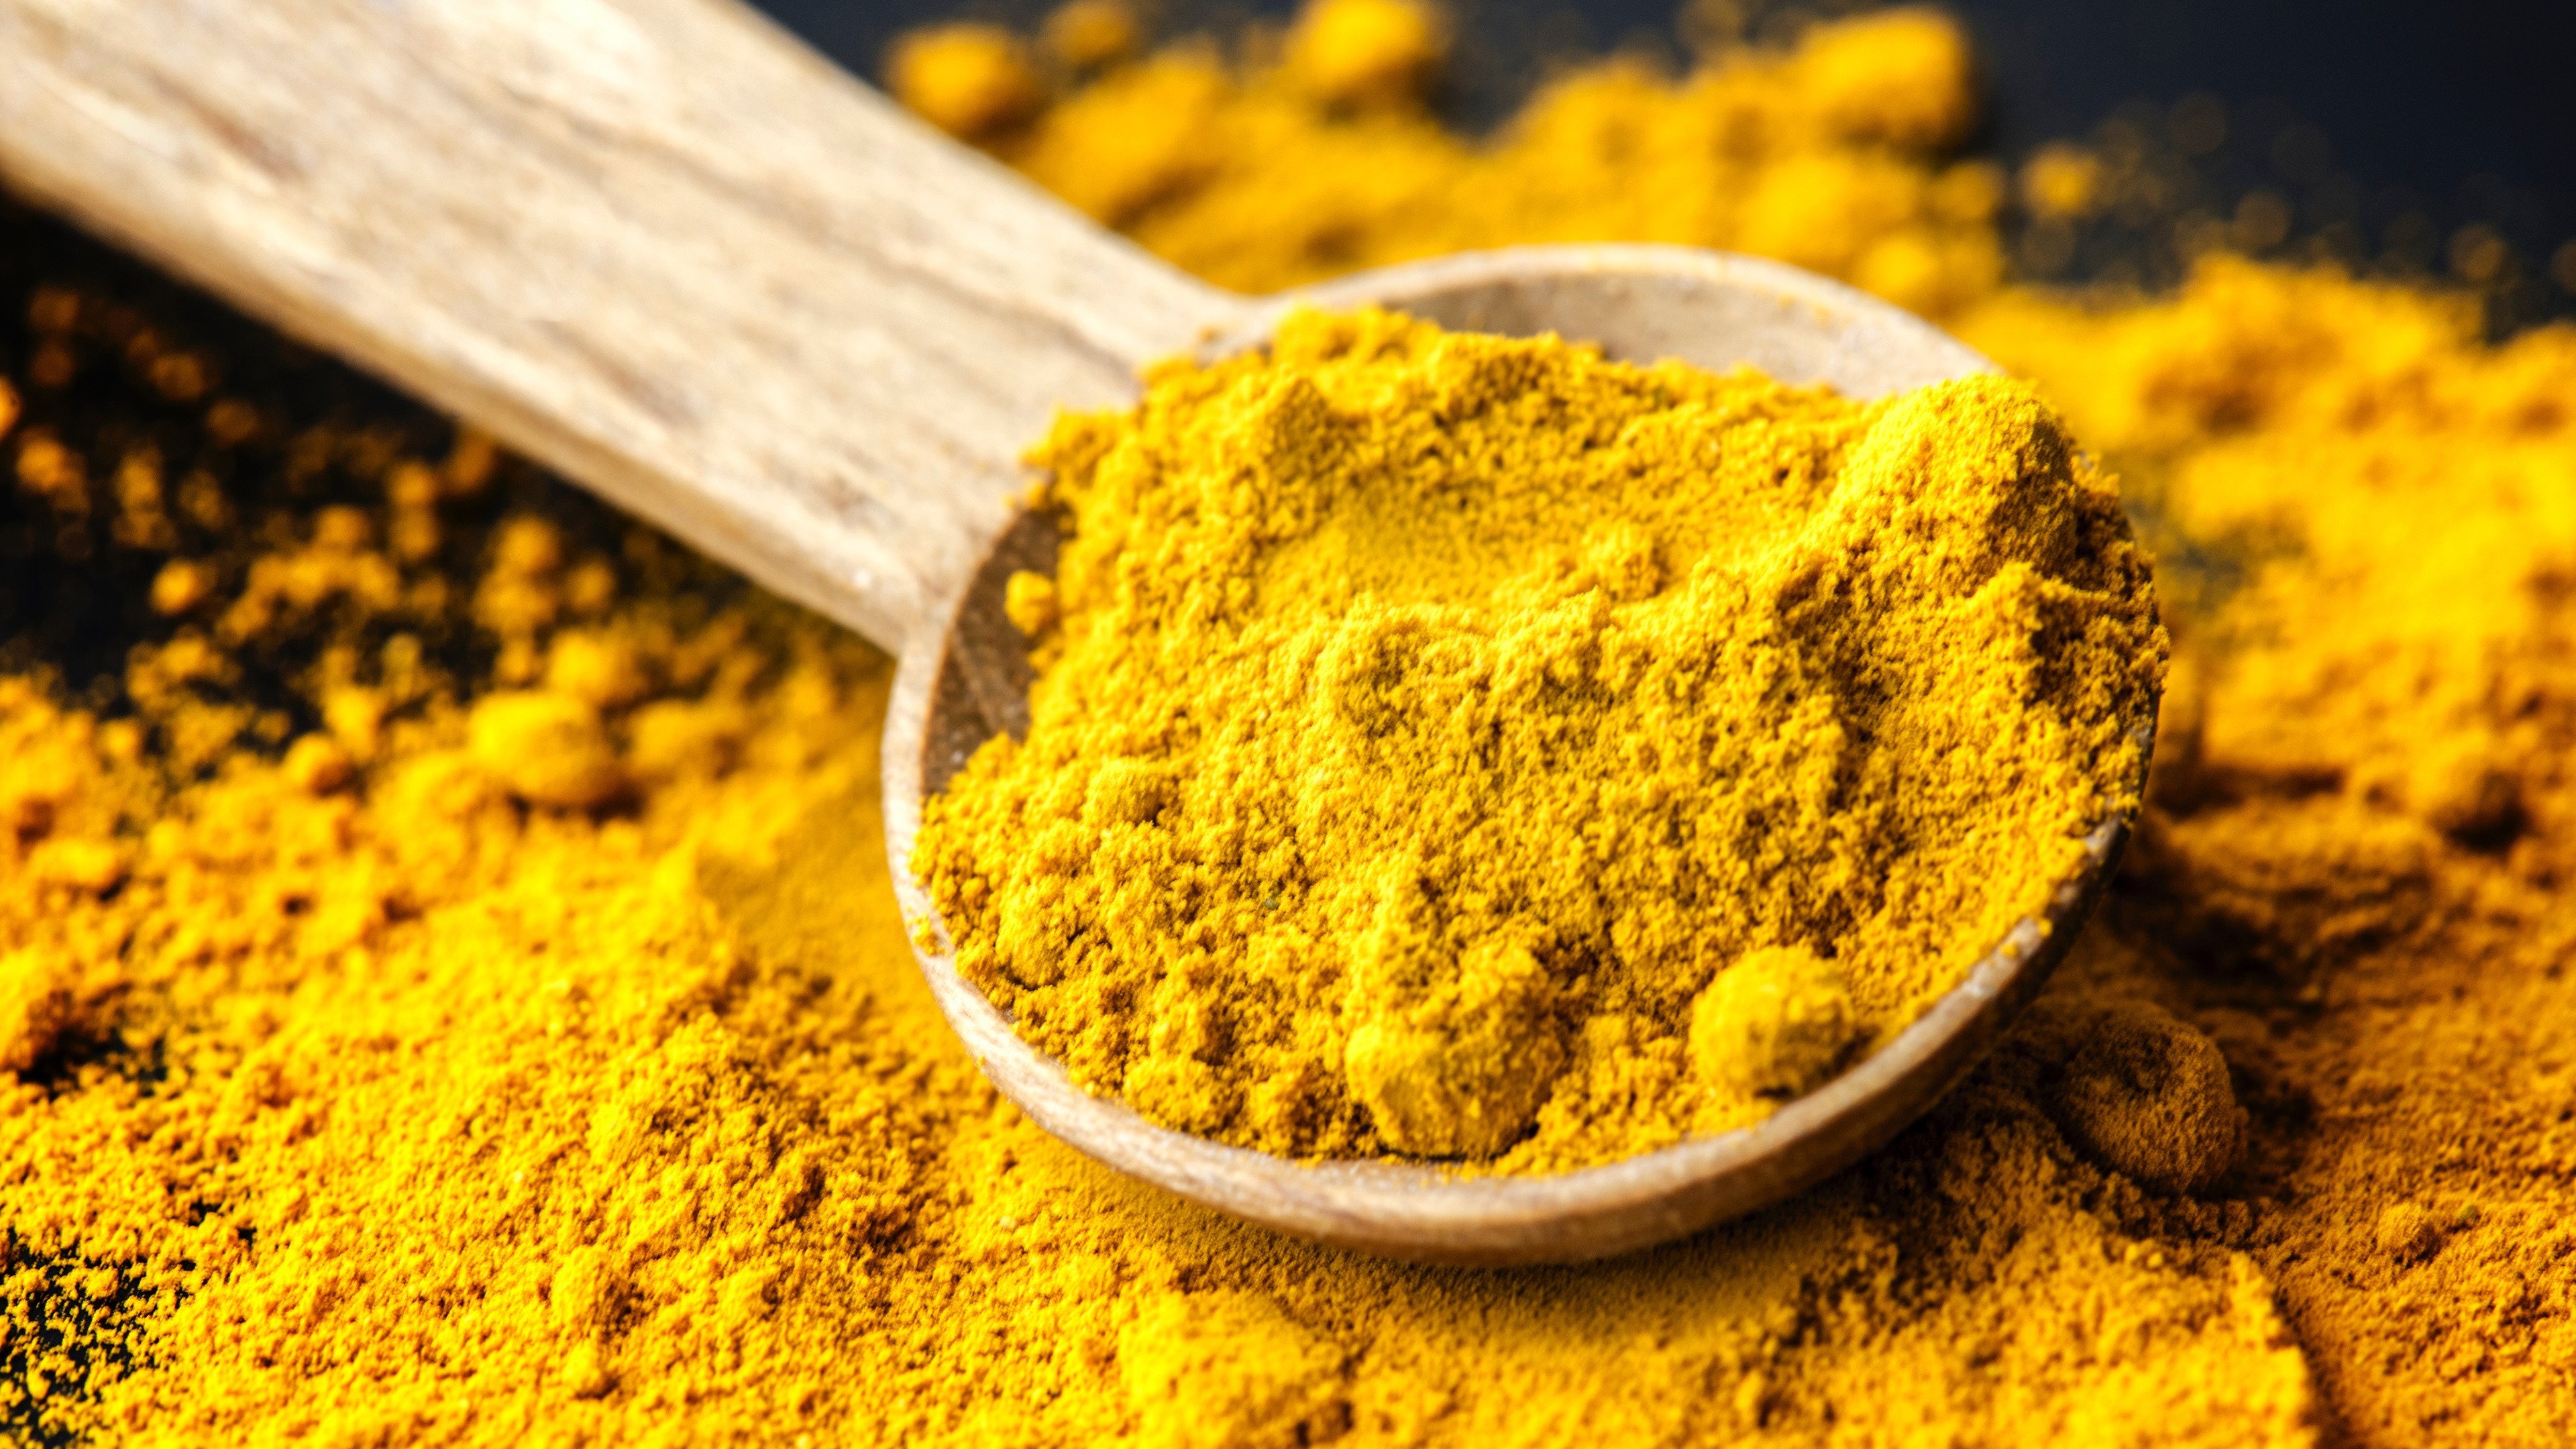 Wooden spoon on a pile of turmeric powder with powder in the spoon.